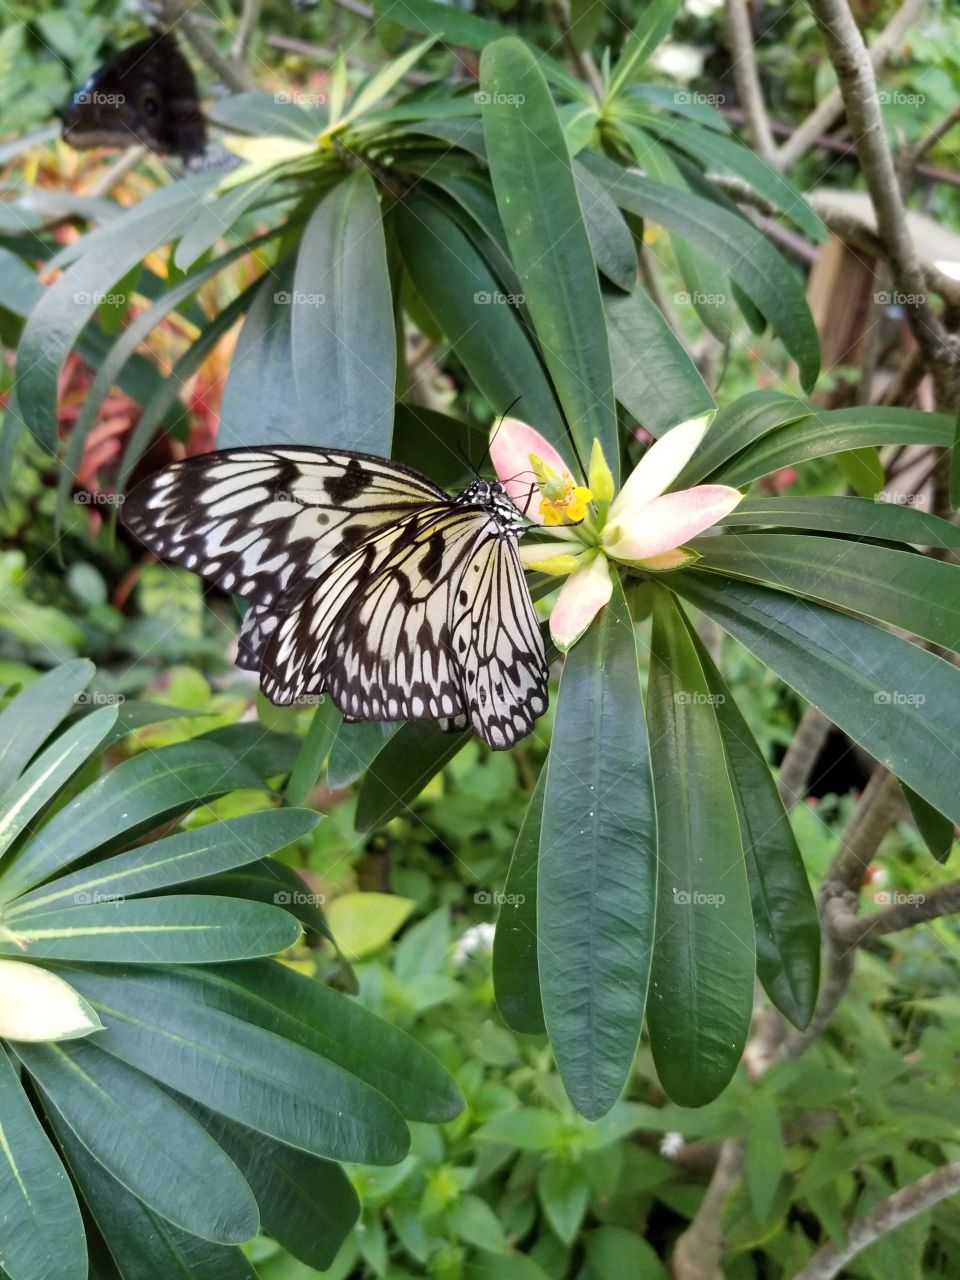 Butterfly on Flower in the Rain Forest